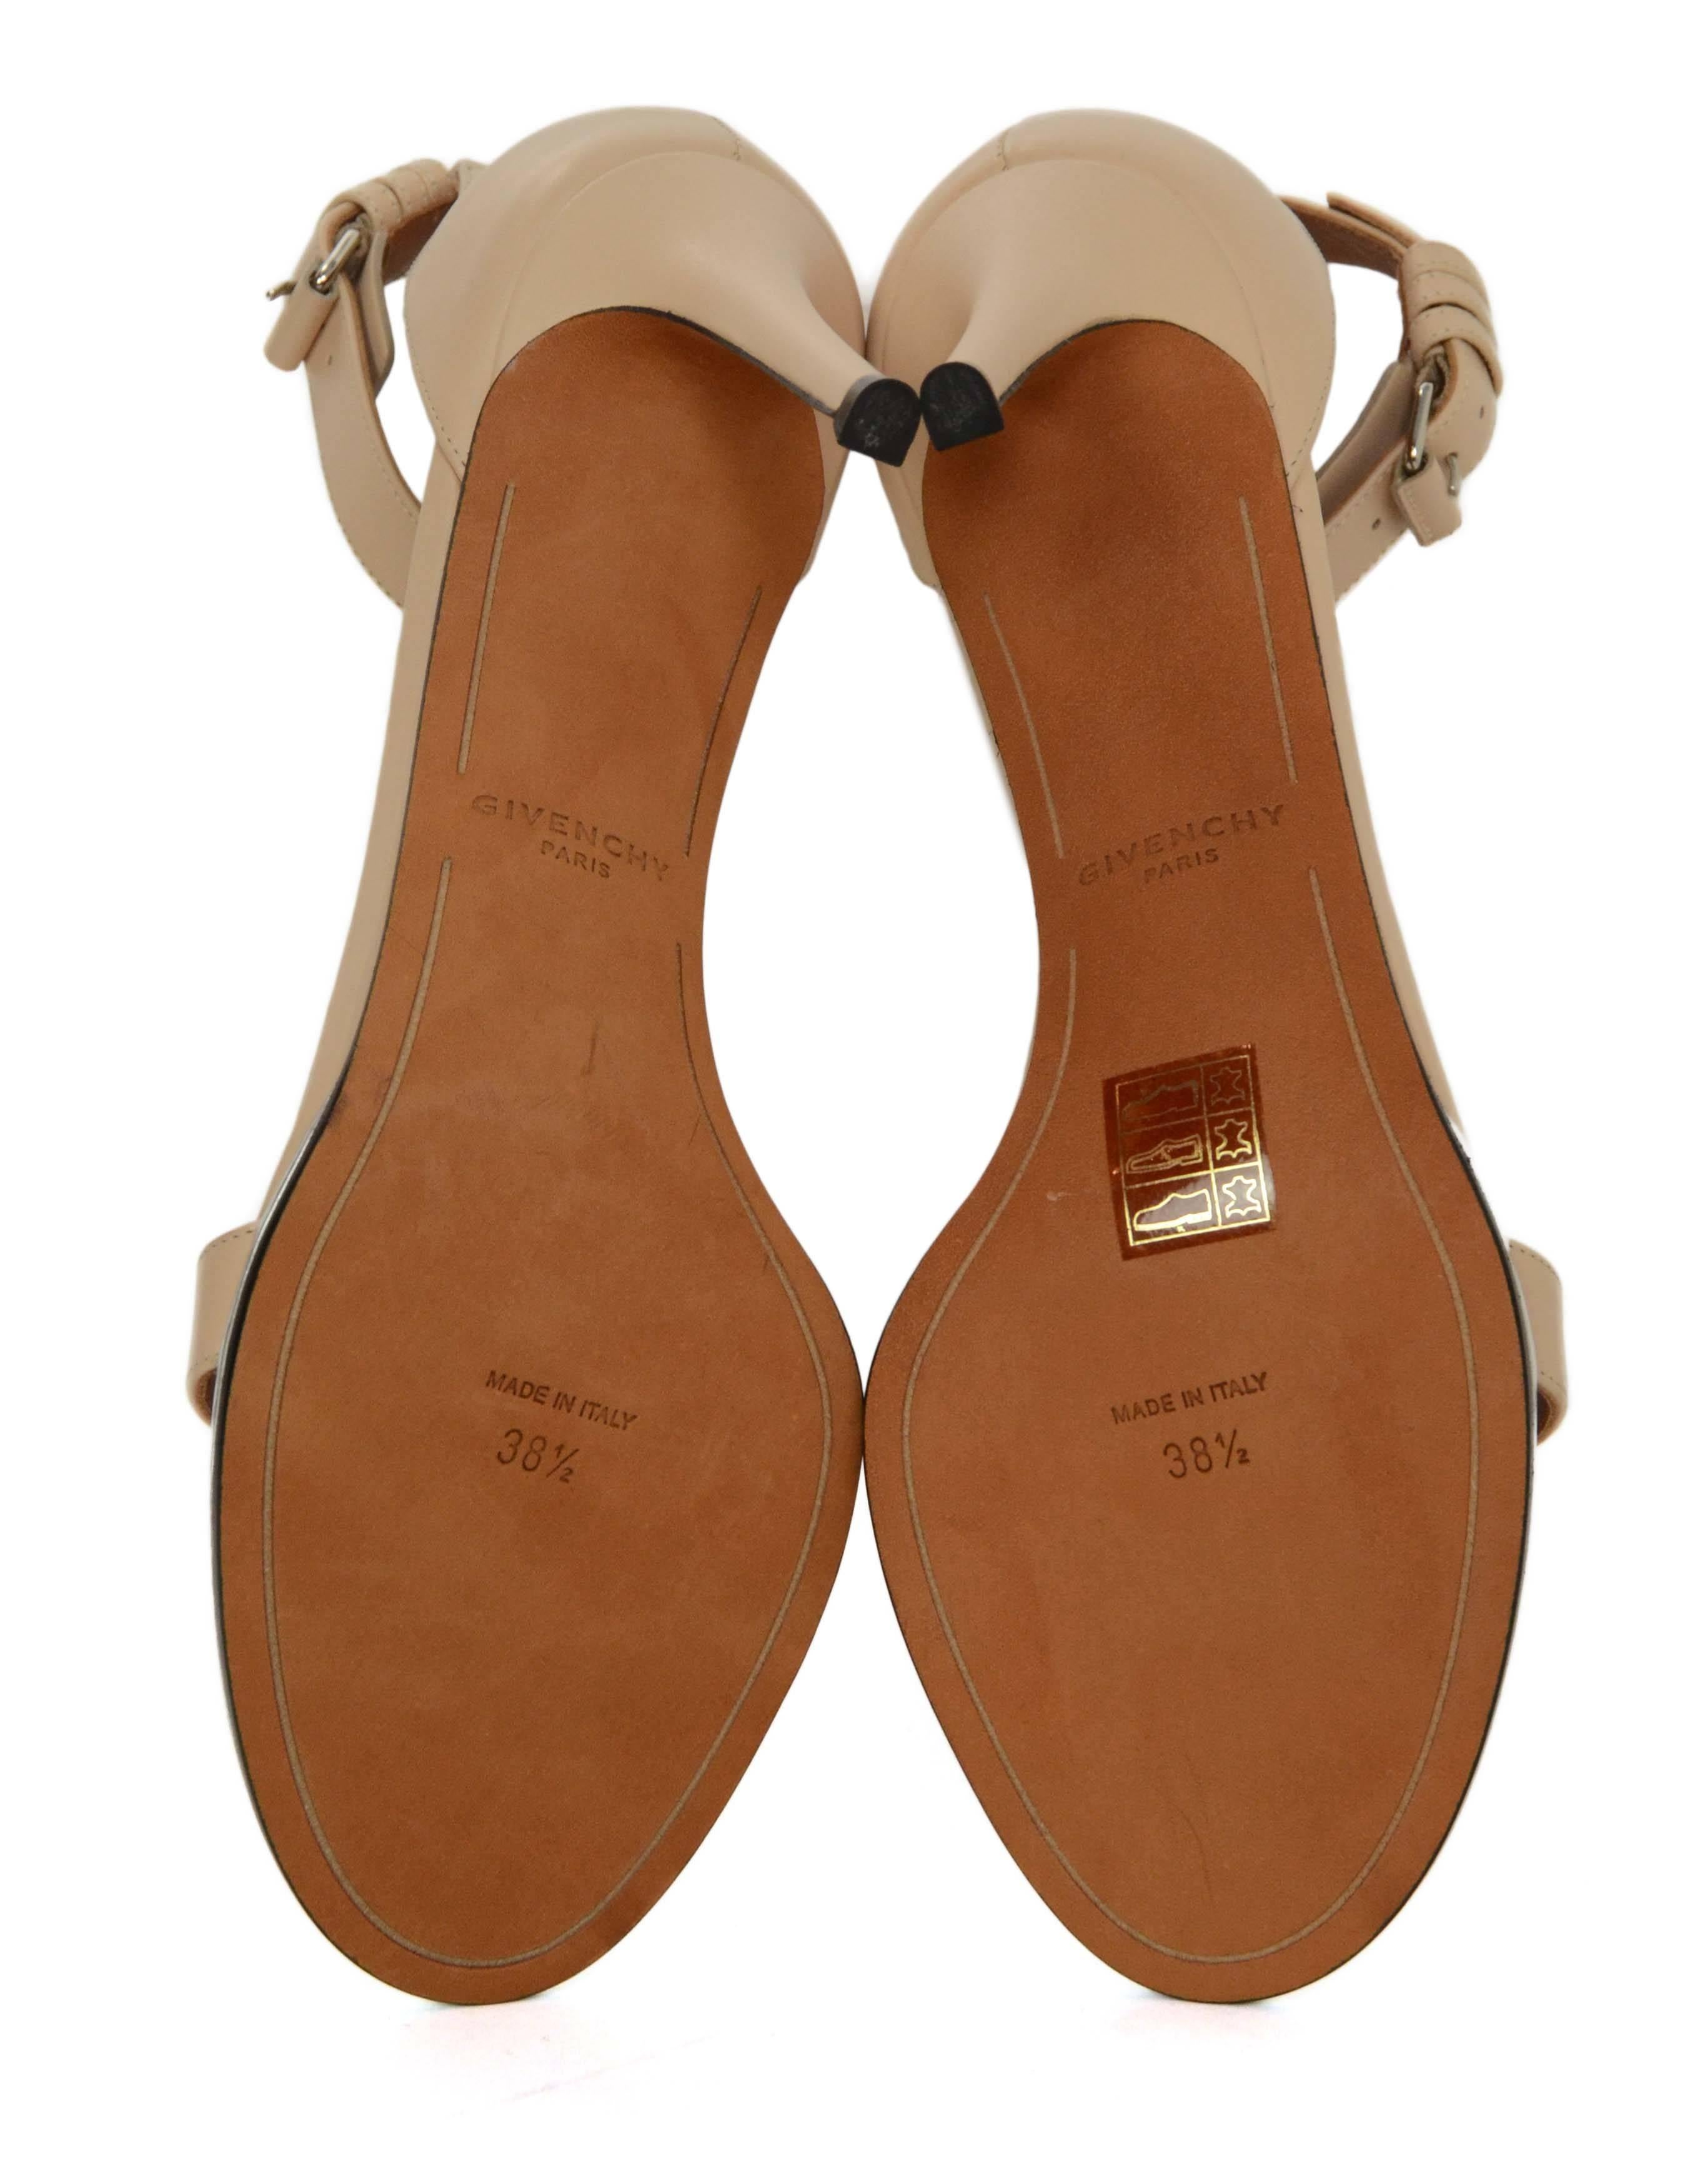 Givenchy Nude Leather Sandals sz 38.5 3